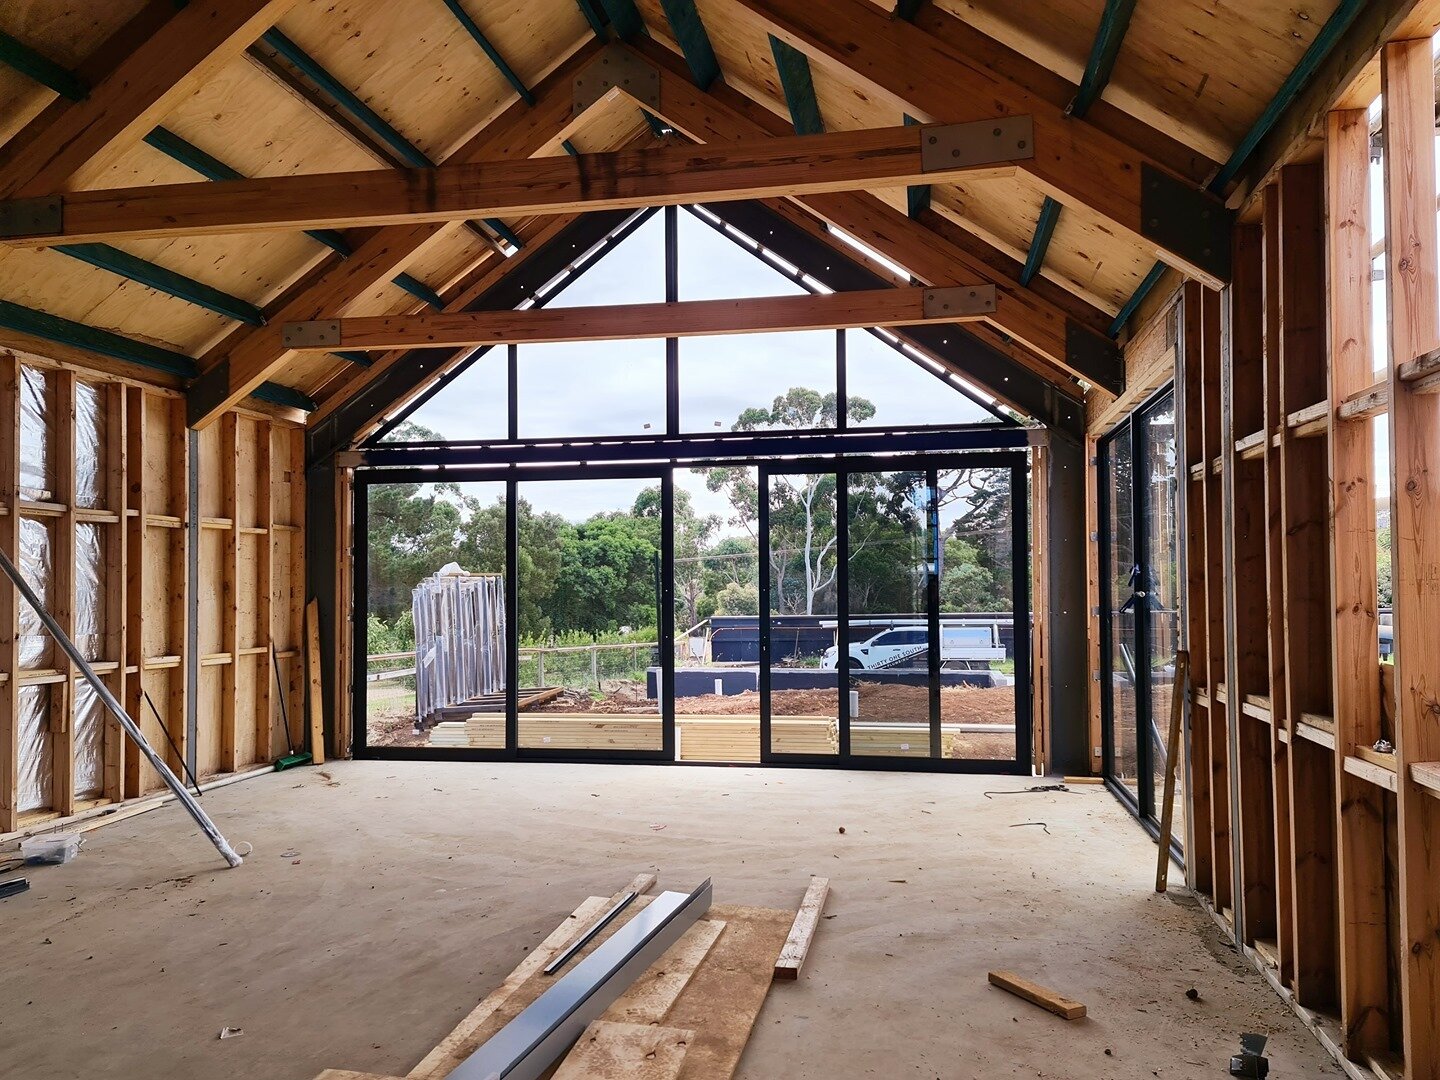 COOK | windows going in and spaces are really taking shape. this rumpus is going to be spectacular @montiqueconstruction #jarchitecture #cookstreet
.
.
.
#architecture #australianarchitecture #melbournedesign #melbournearchitecture #modernbarn #morni